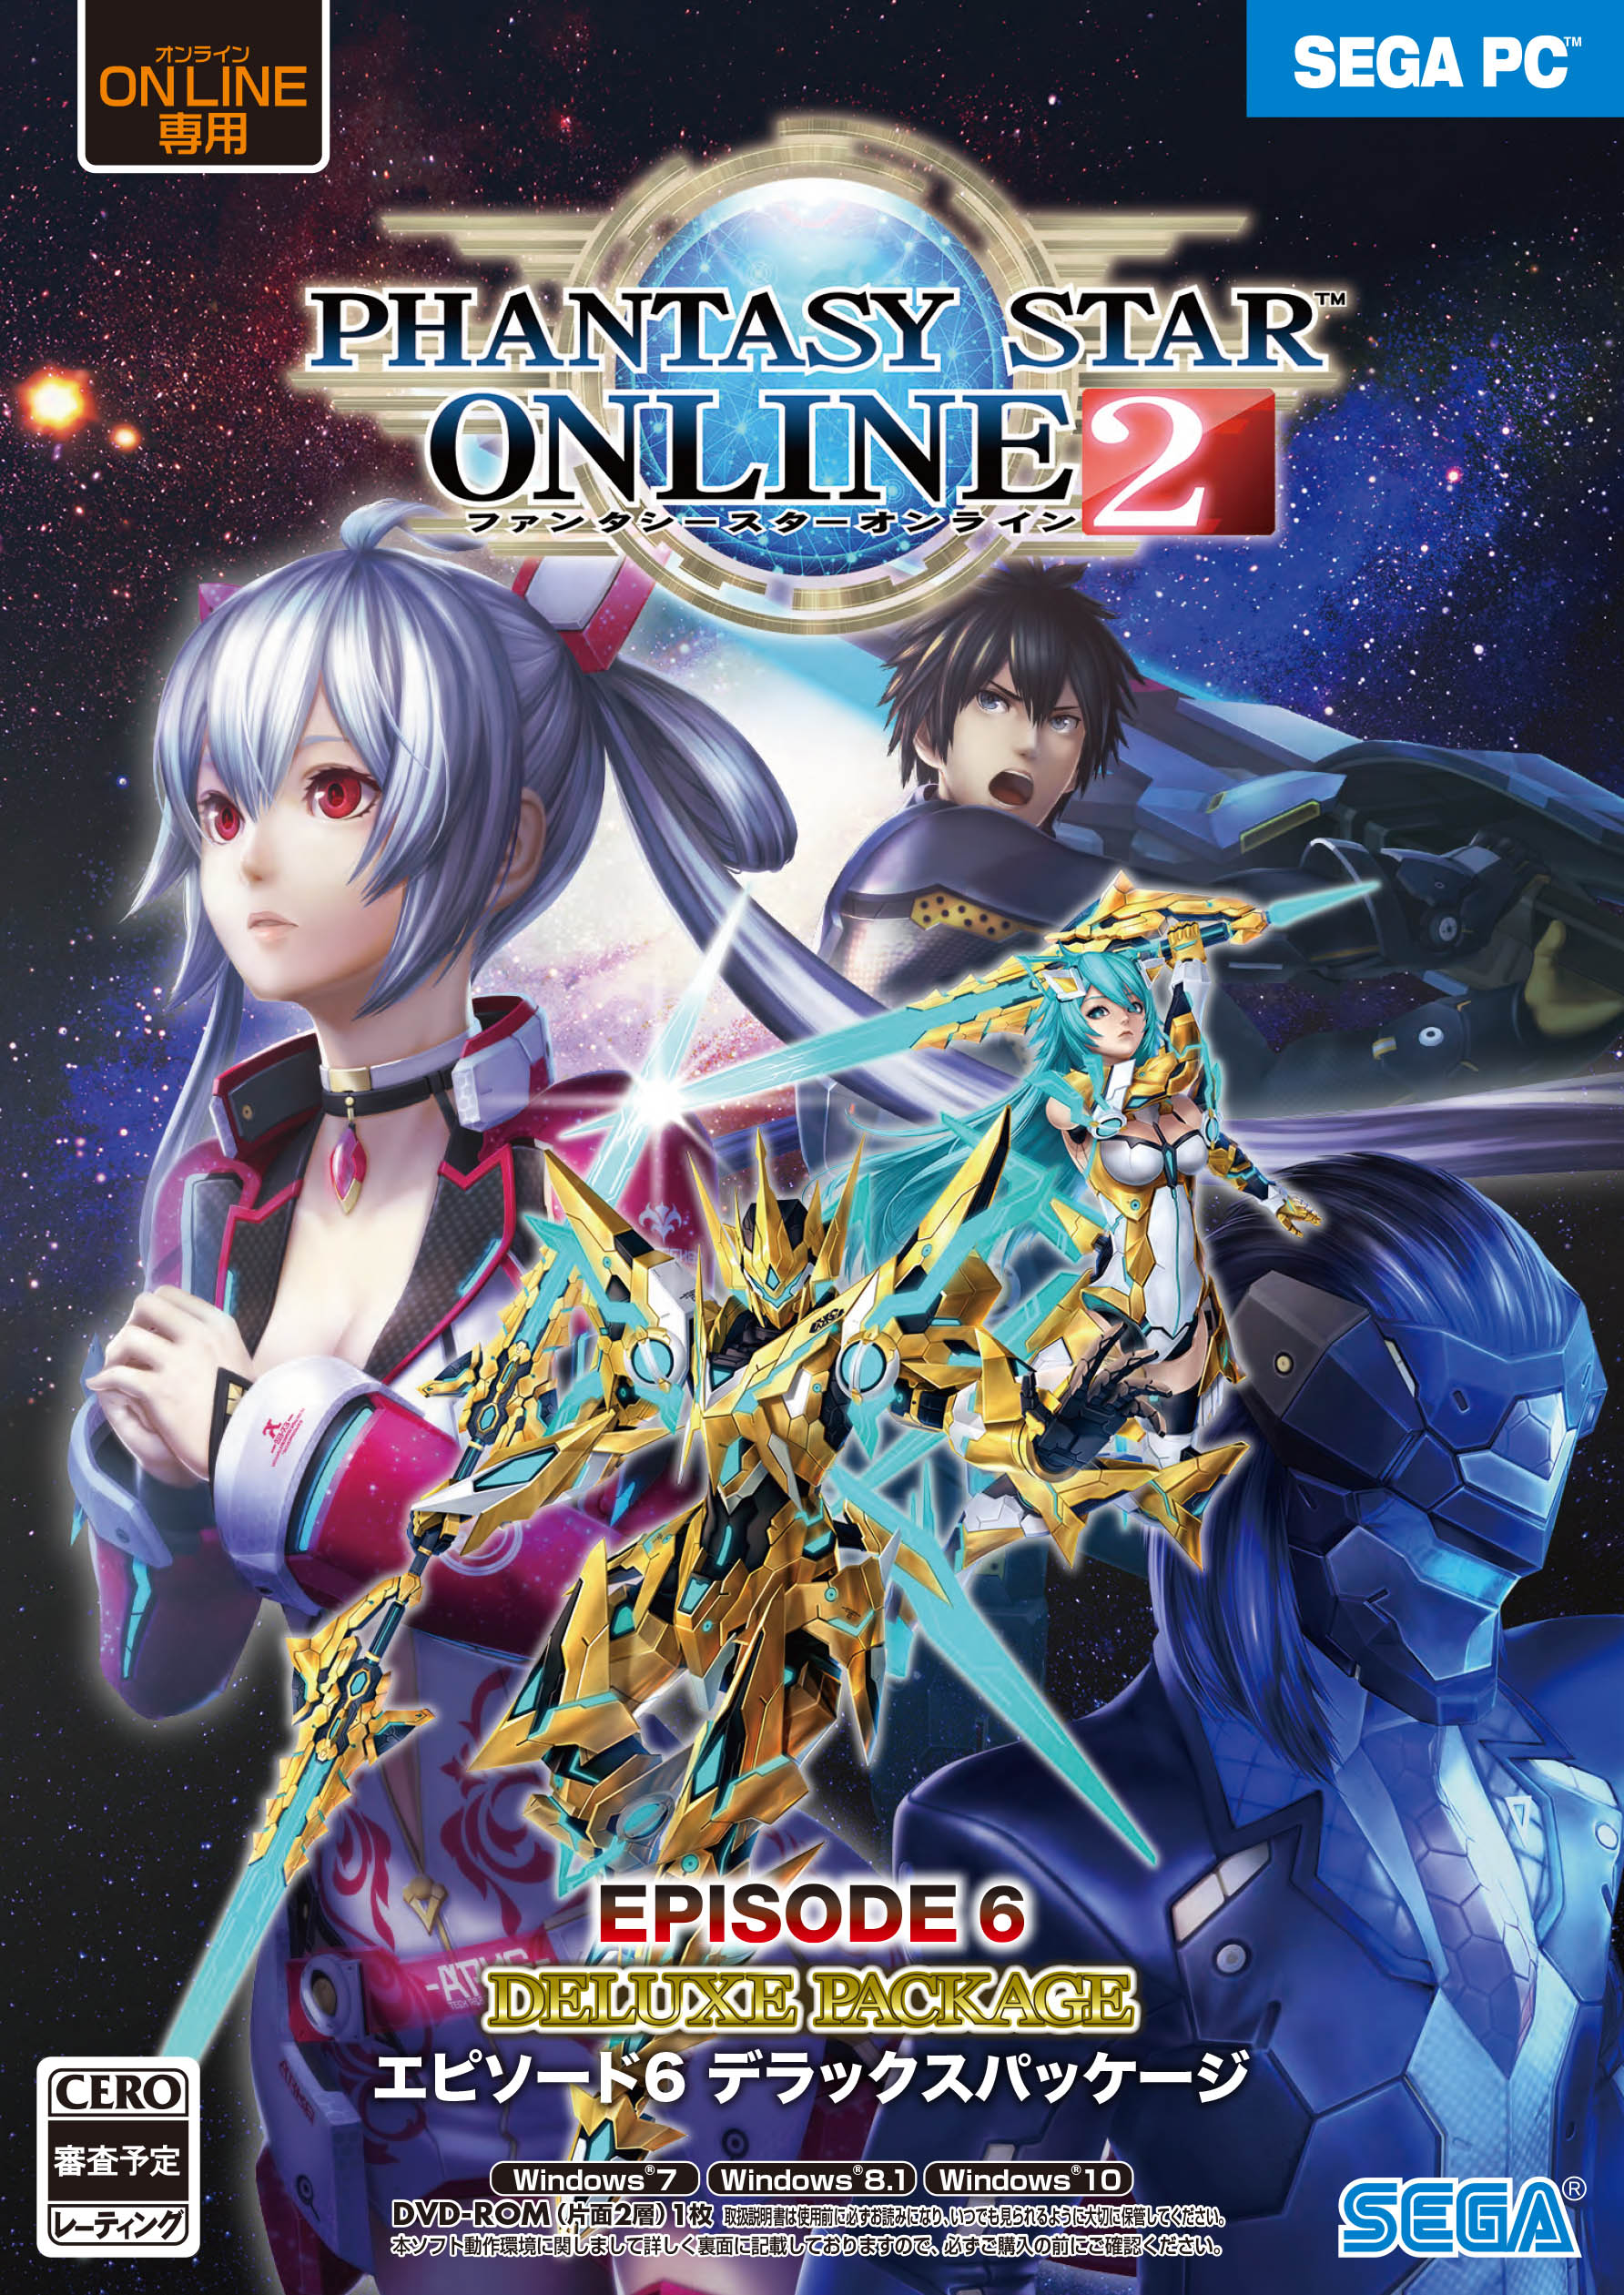 Phantasy Star Online 2 Episode 6 Deluxe Package For Ps4 Switch And Pc Launches April 23 In Japan Gematsu